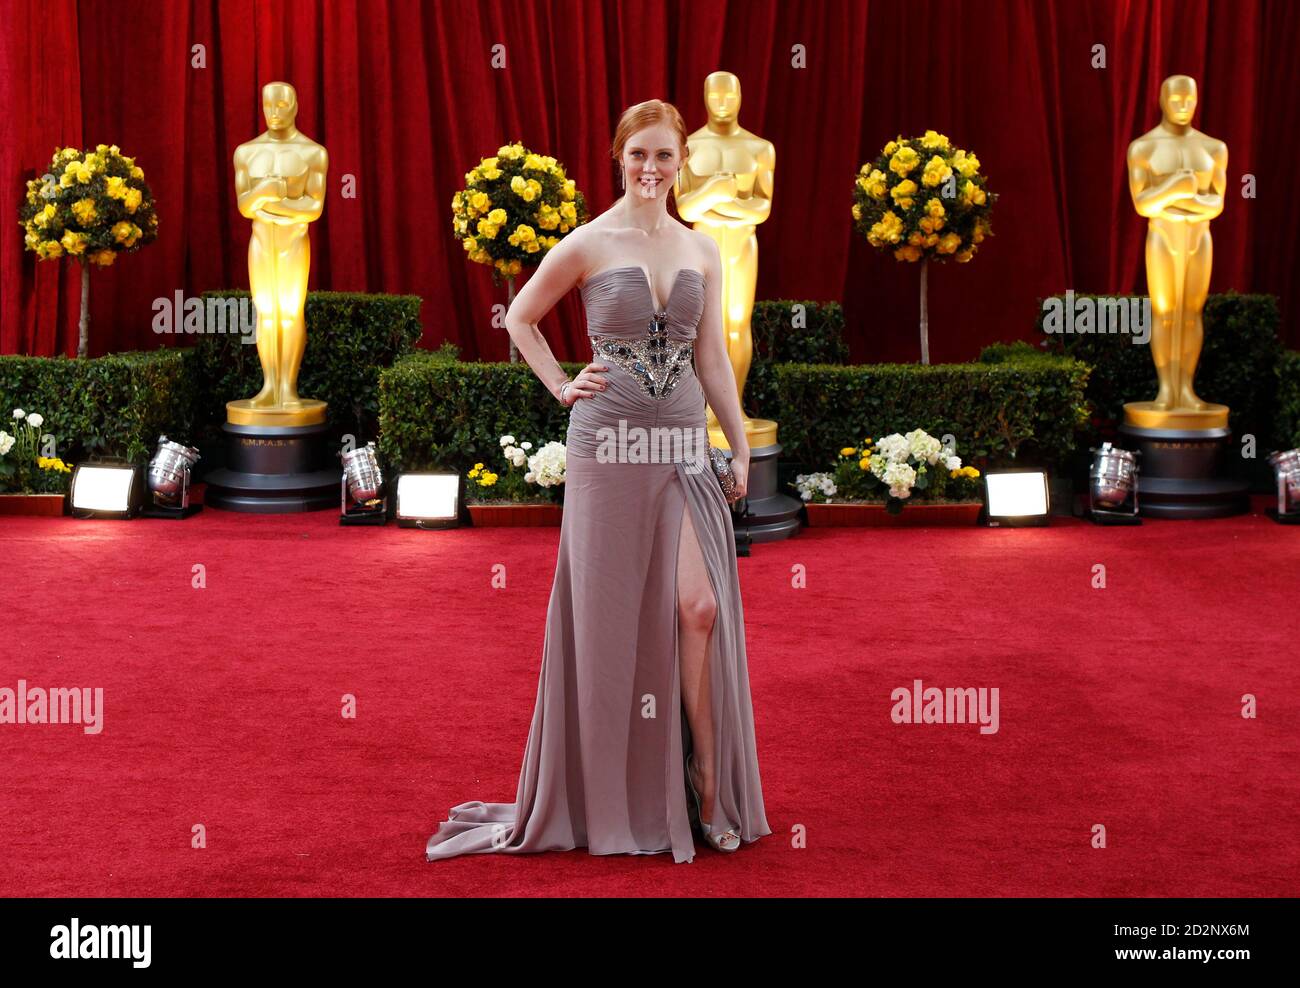 Actress Deborah Ann Woll poses for photographers as she arrives at the 82nd Academy Awards in Hollywood, March 7, 2010.   REUTERS/Lucas Jackson   (UNITED STATES)   (OSCARS-ARRIVALS - Tags: ENTERTAINMENT) Stock Photo